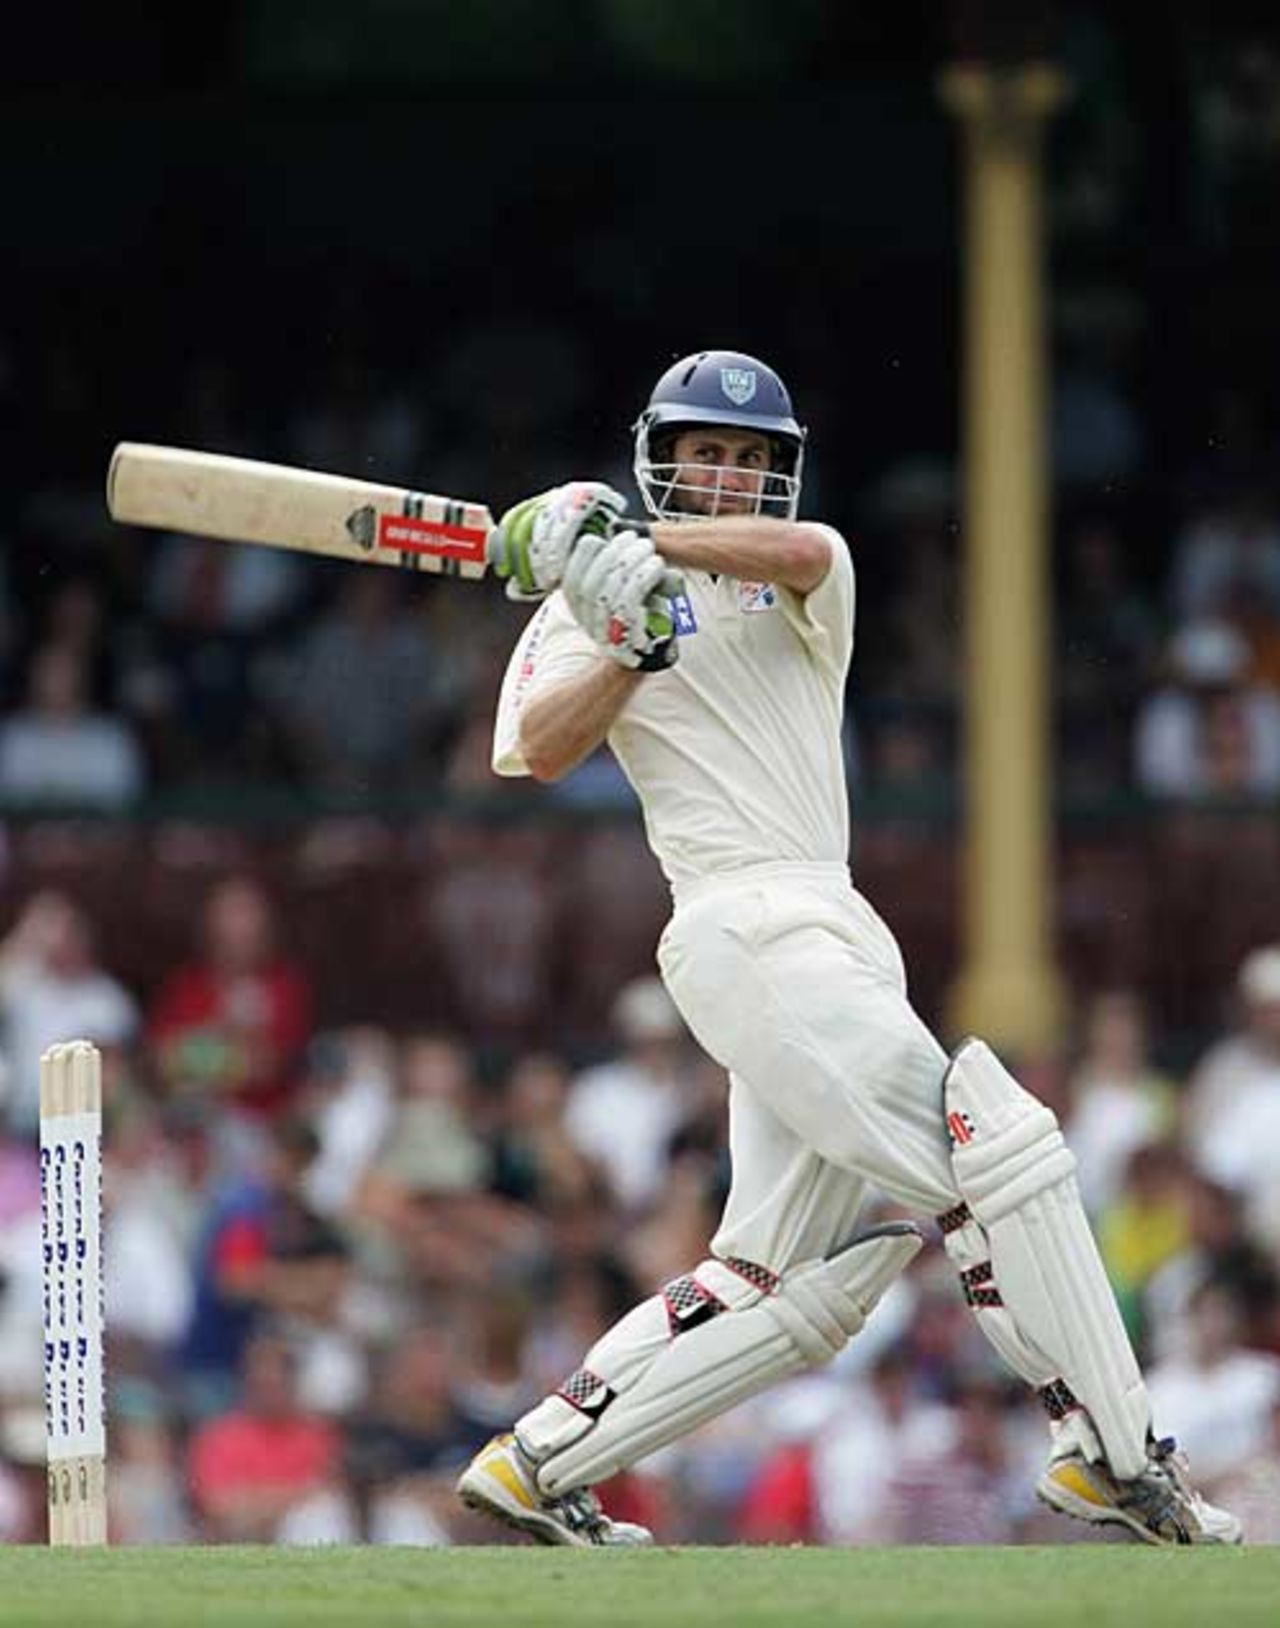 Simon Katich pulls during his 68 as England's bowlers are put to the test, New South Wales v England XI, SCG, November 12, 2006